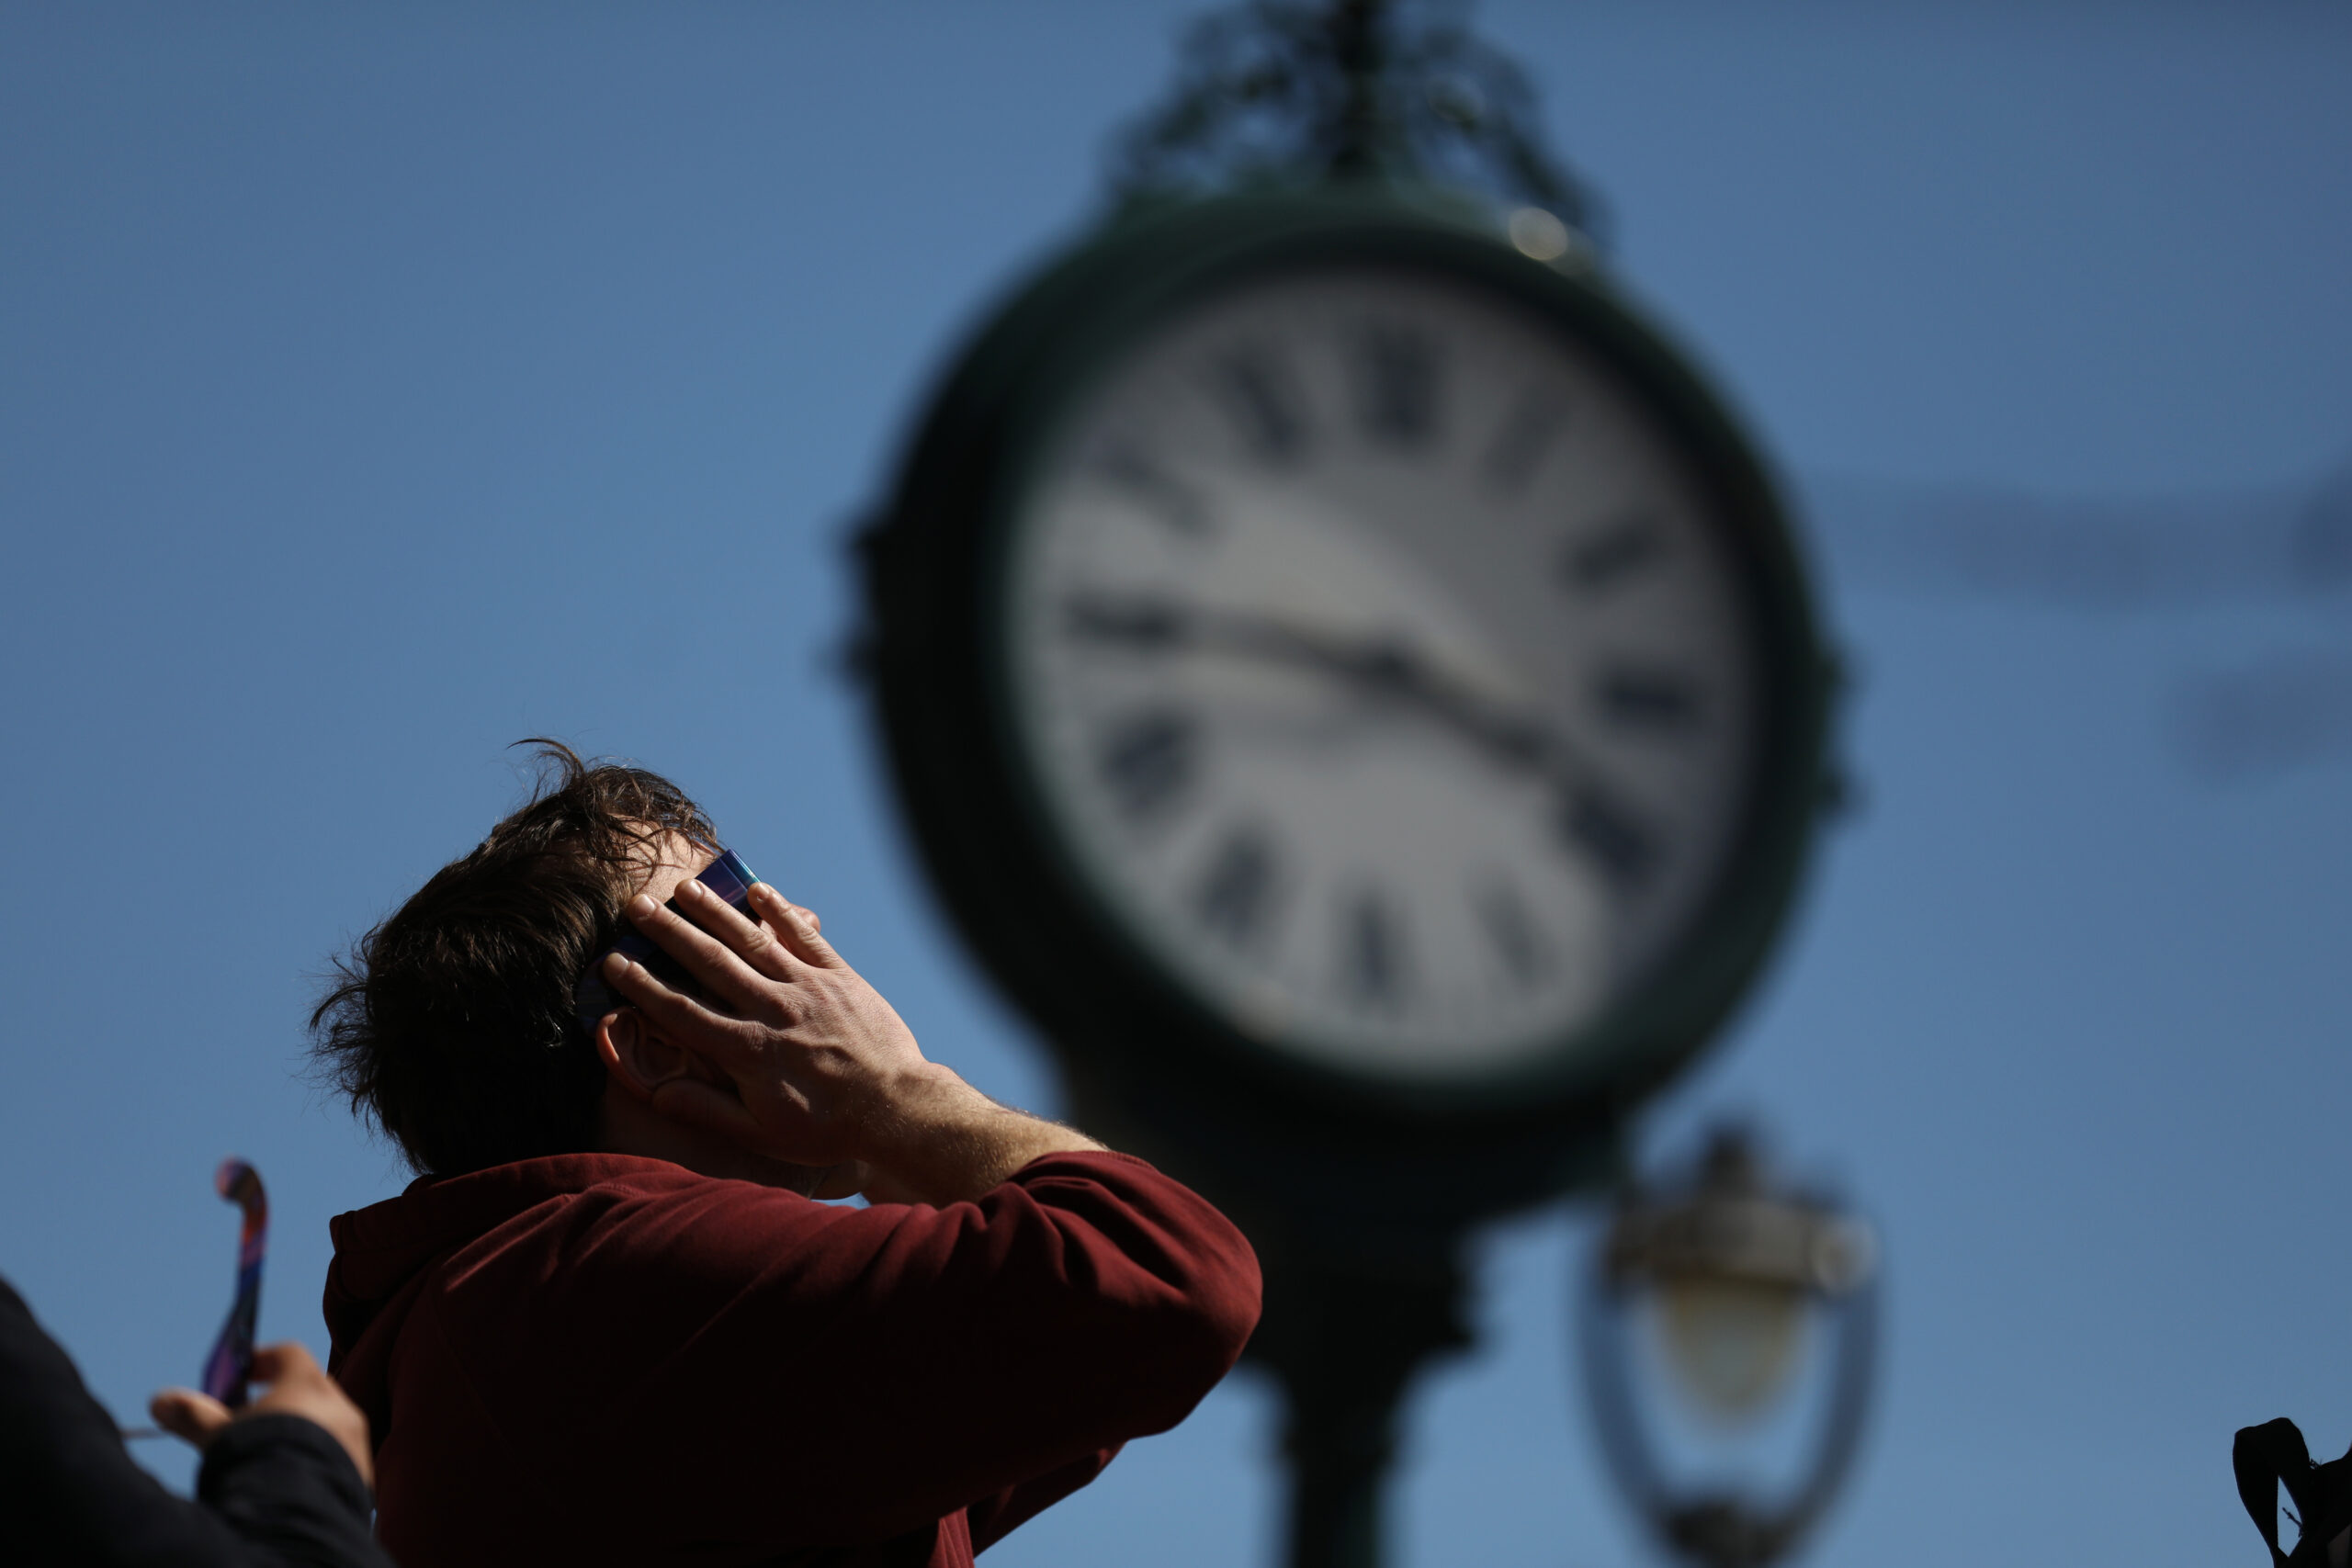 a person looks at the sky, in front of a clock